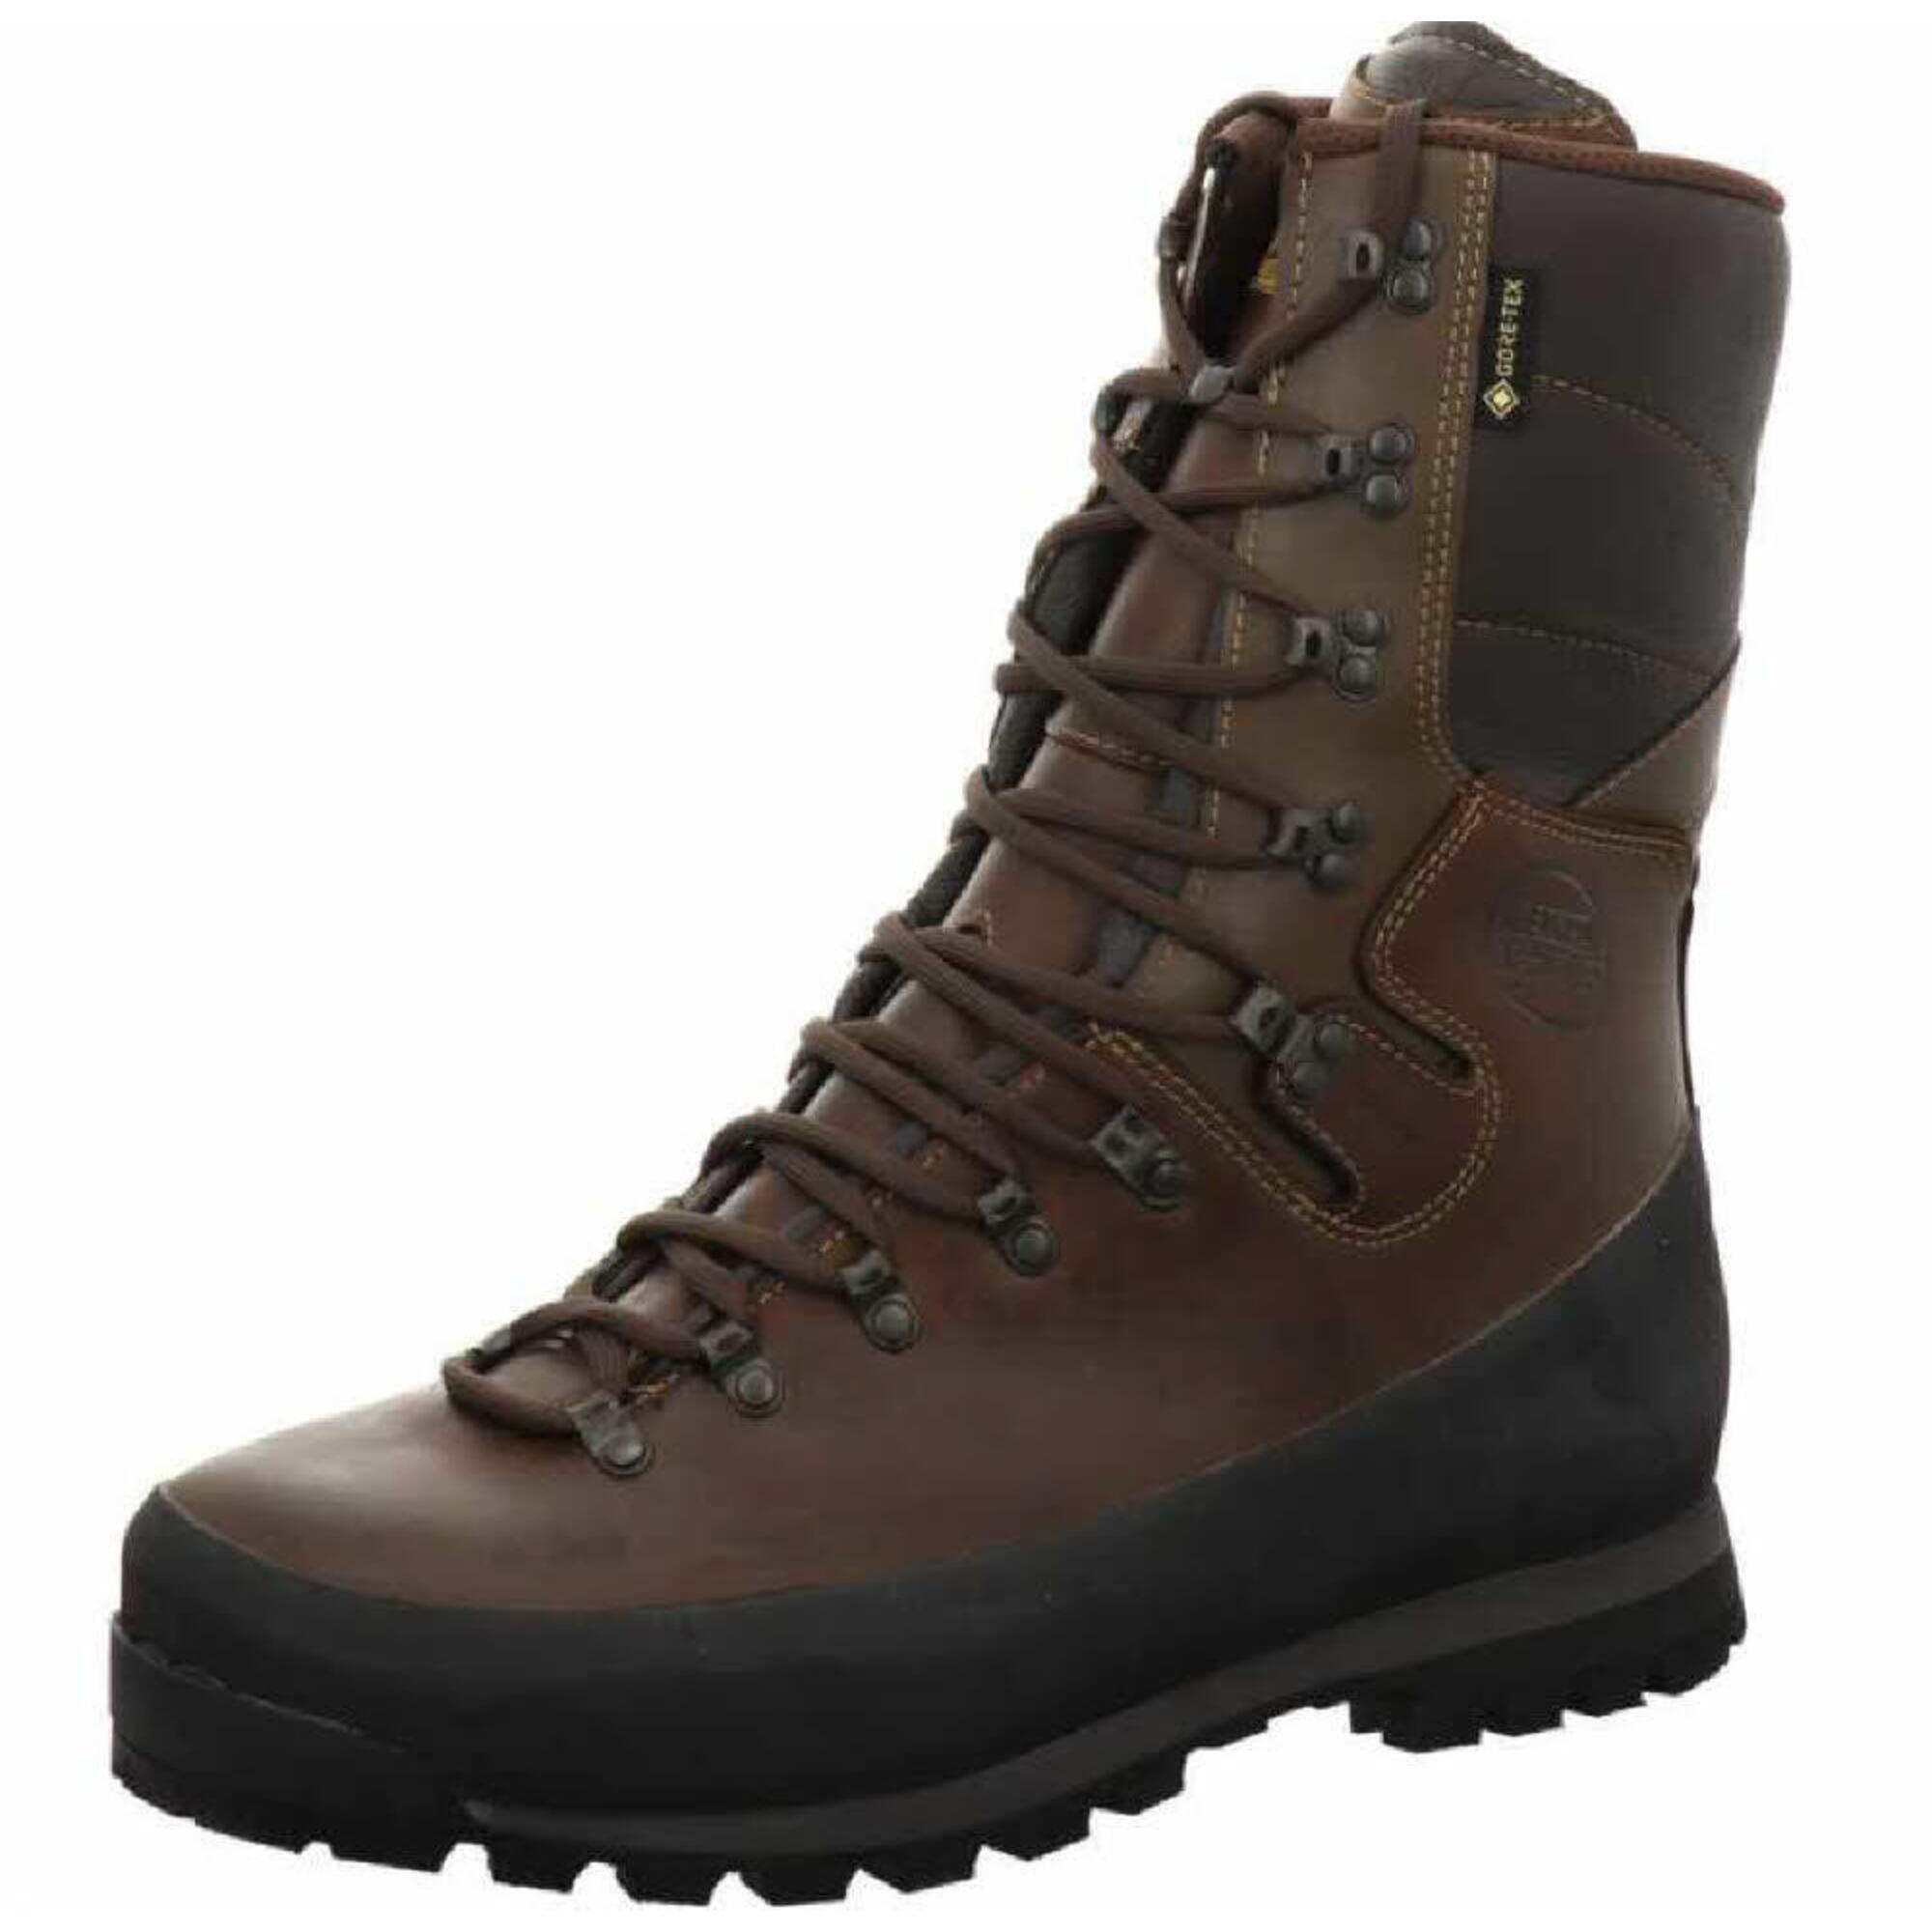 MEINDL Meindl Dovre Extreme GTX - Wide Field Boots UK 9.5